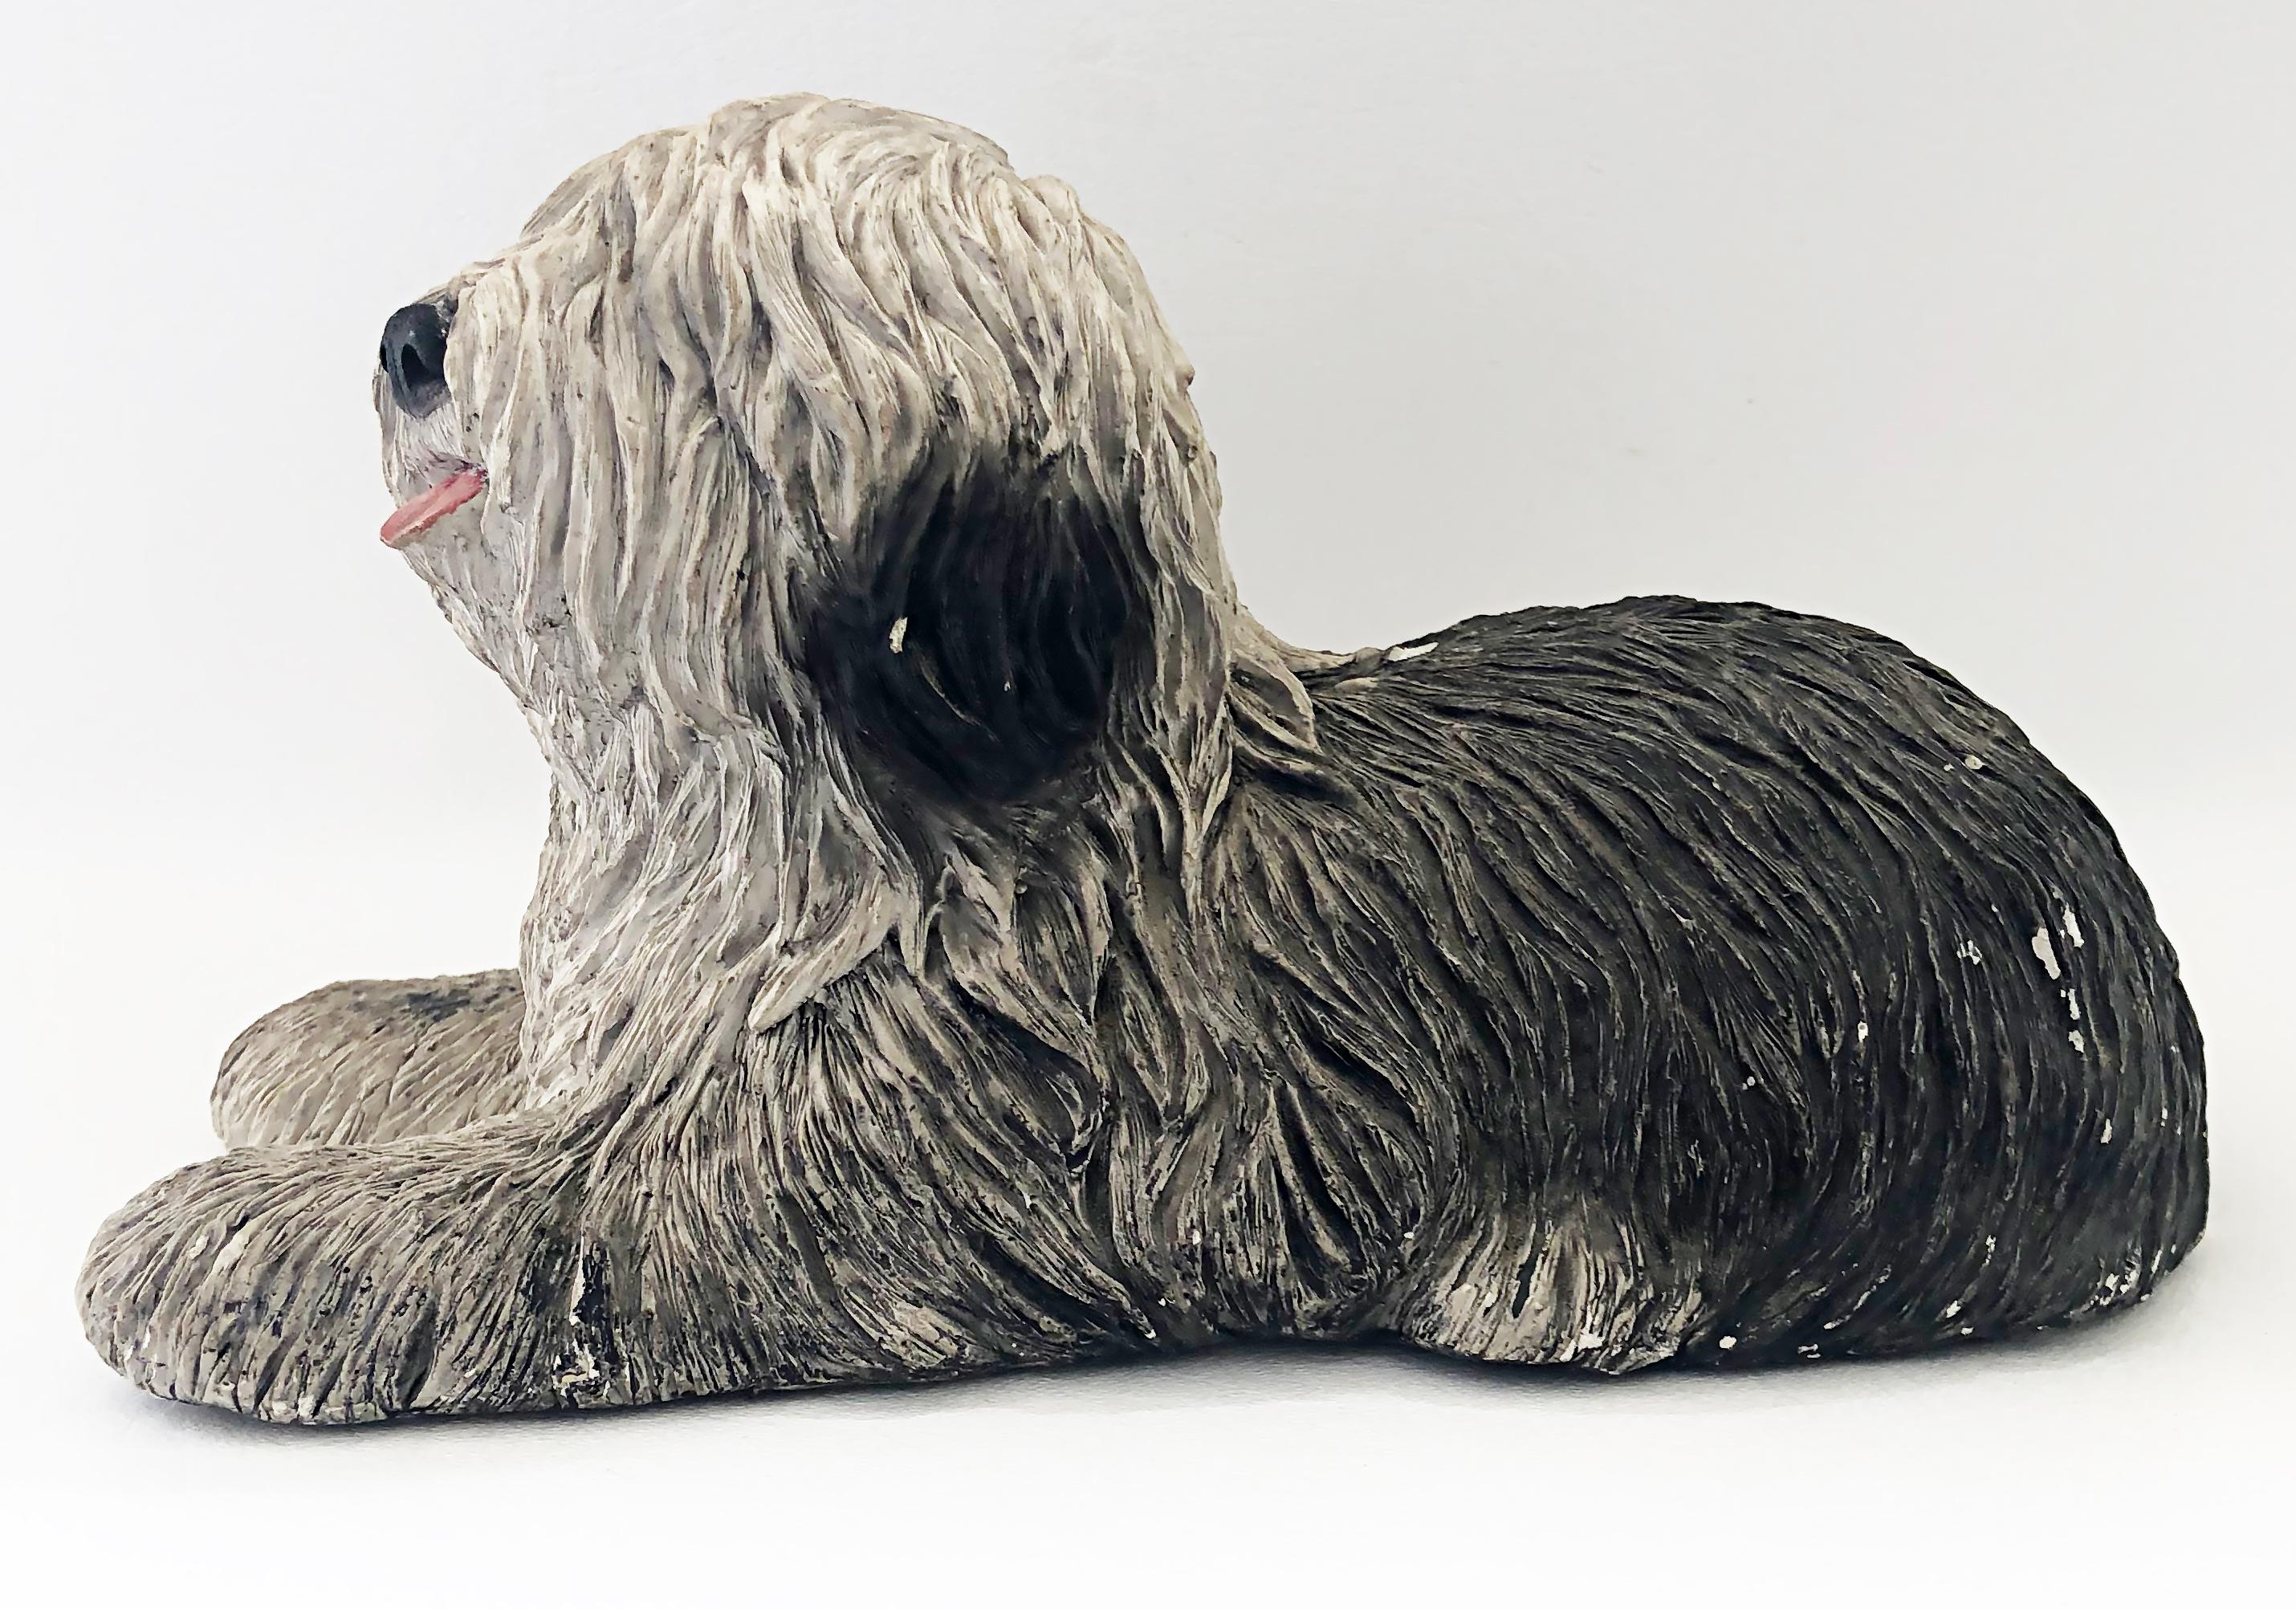 Handmade sandicast old english sheepdog sculpture, signed Sandra Brue, 1983.

Offered for sale is a hand-made sandicast sculpture of a shaggy black and white Sheepdog with an open mouth and tongue exposed. This piece is signed, copyrighted and